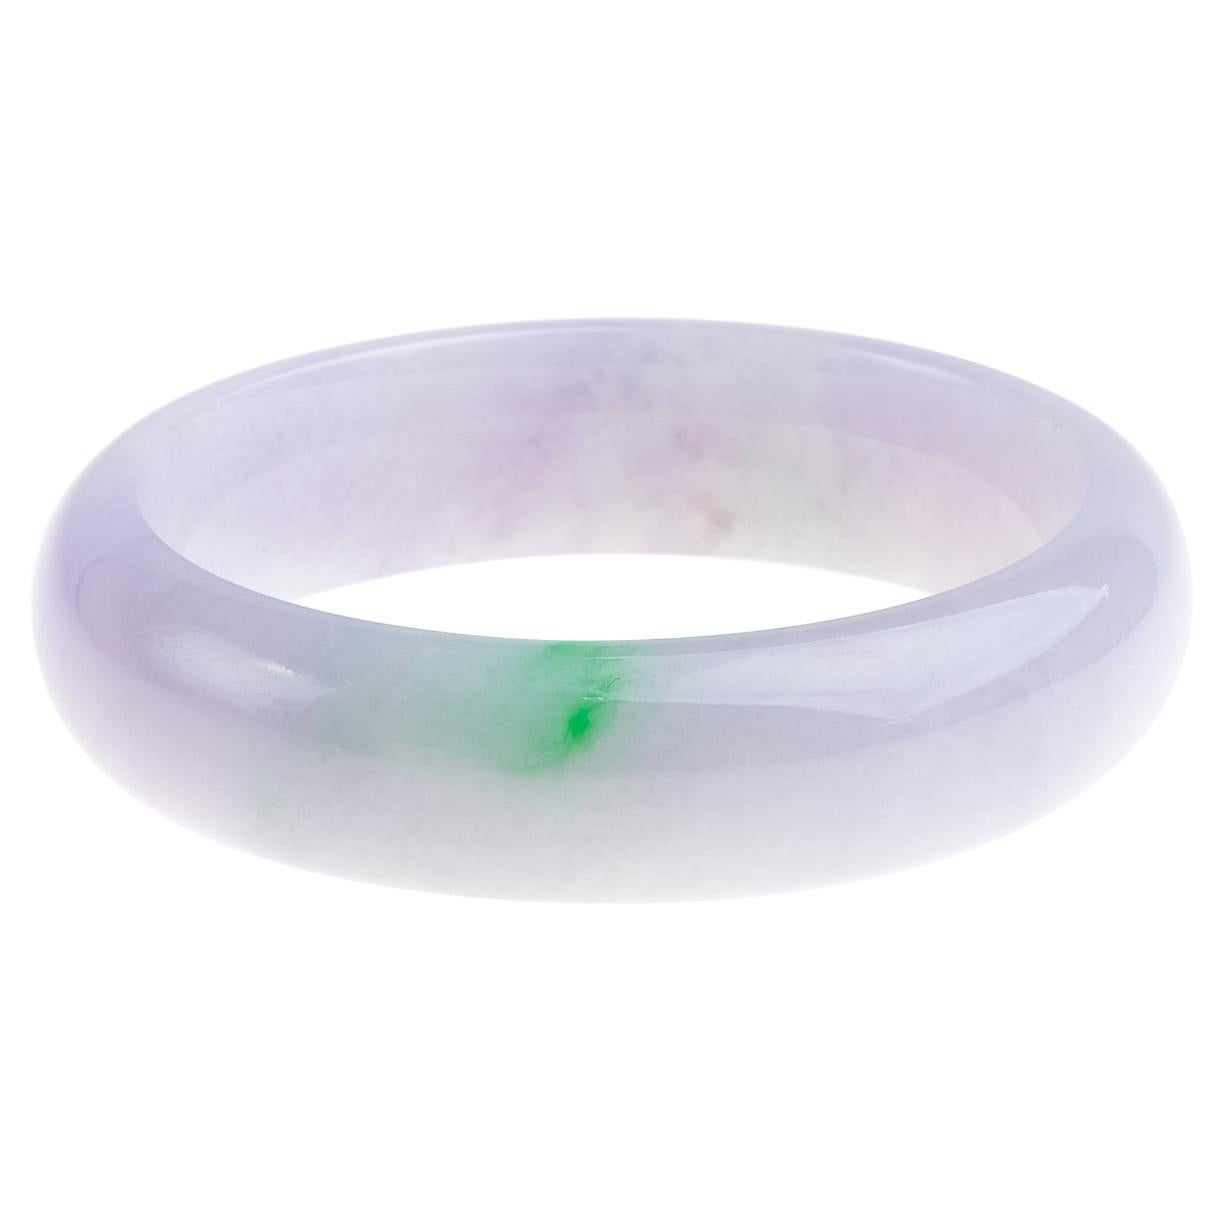 Lavender and Green Jadeite Jade Bangle, Certified Untreated